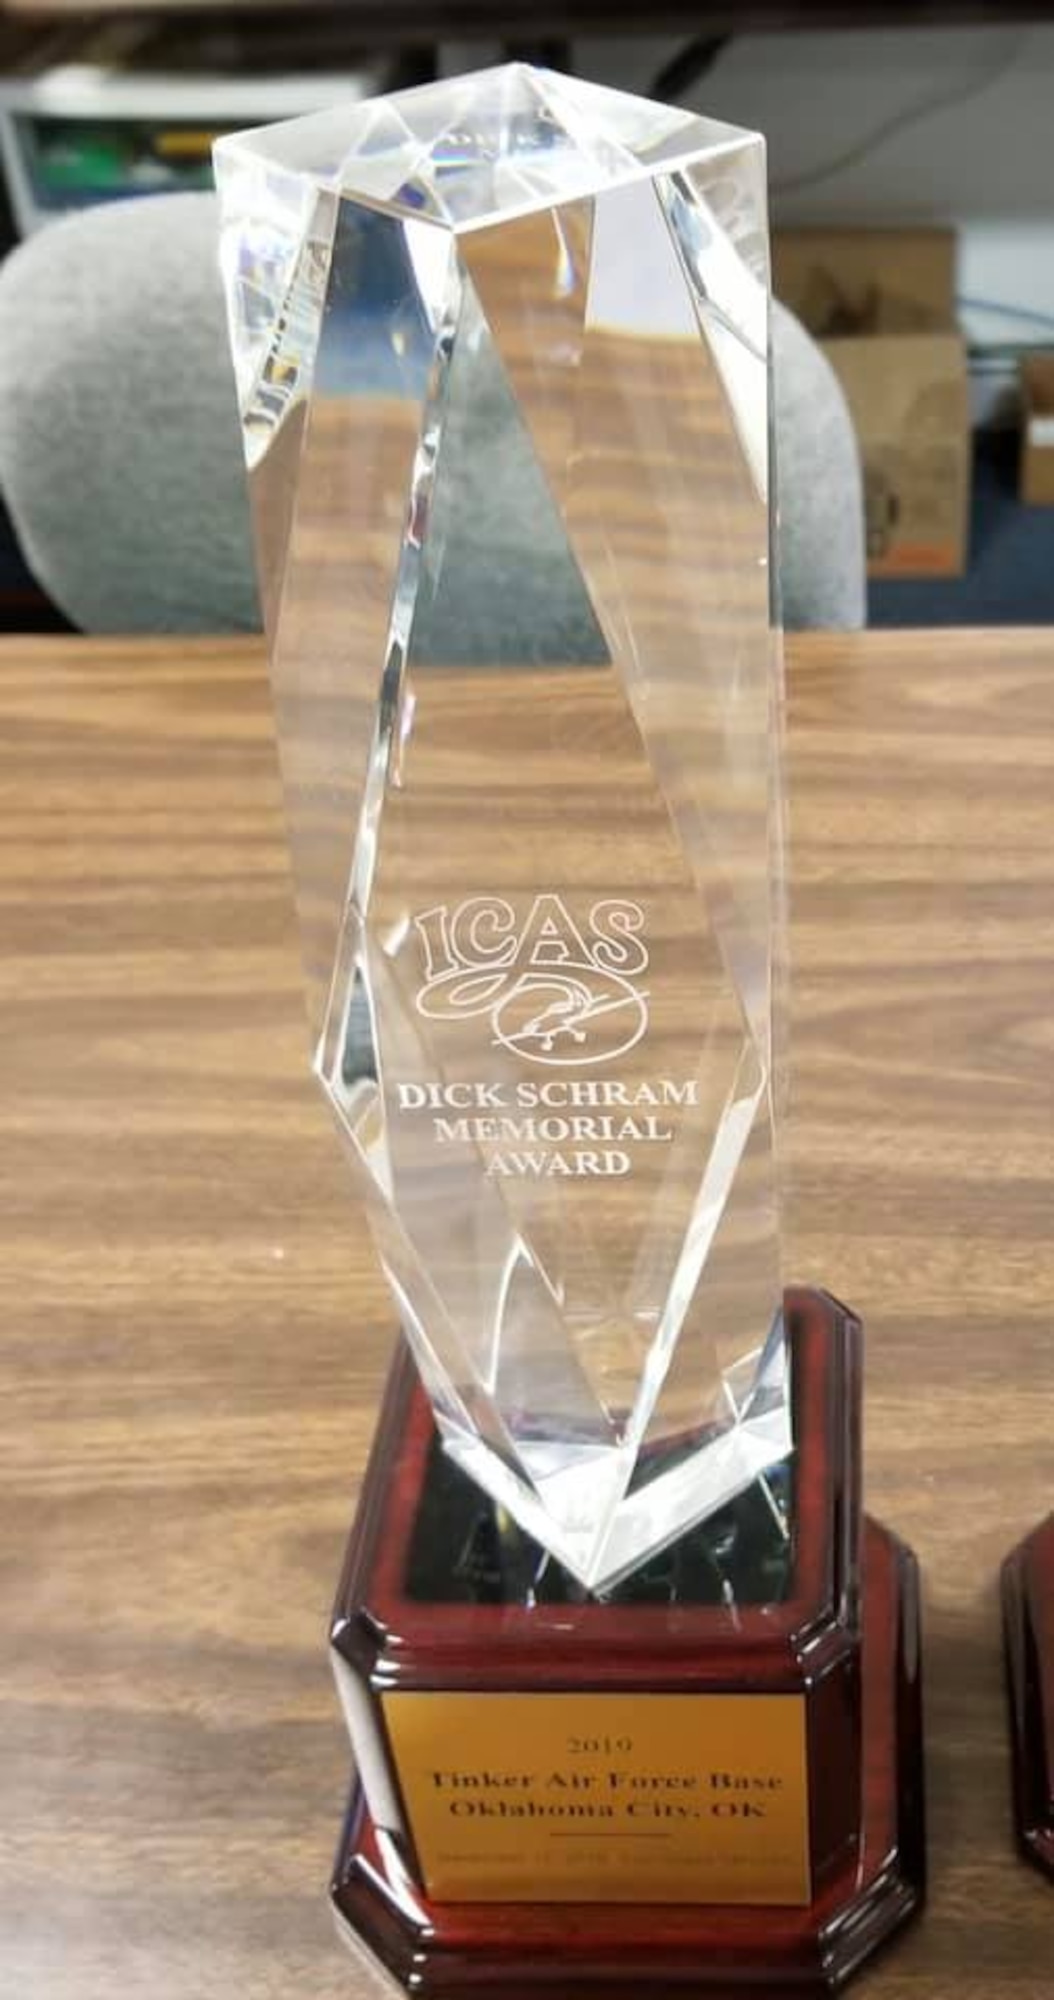 Tinker Air Force Base was awarded the Dick Schram Memorial Award Dec. 16, 2019 by the International Council of Air Show in Las Vegas for the Star Spangled Salute Air and Space Show.